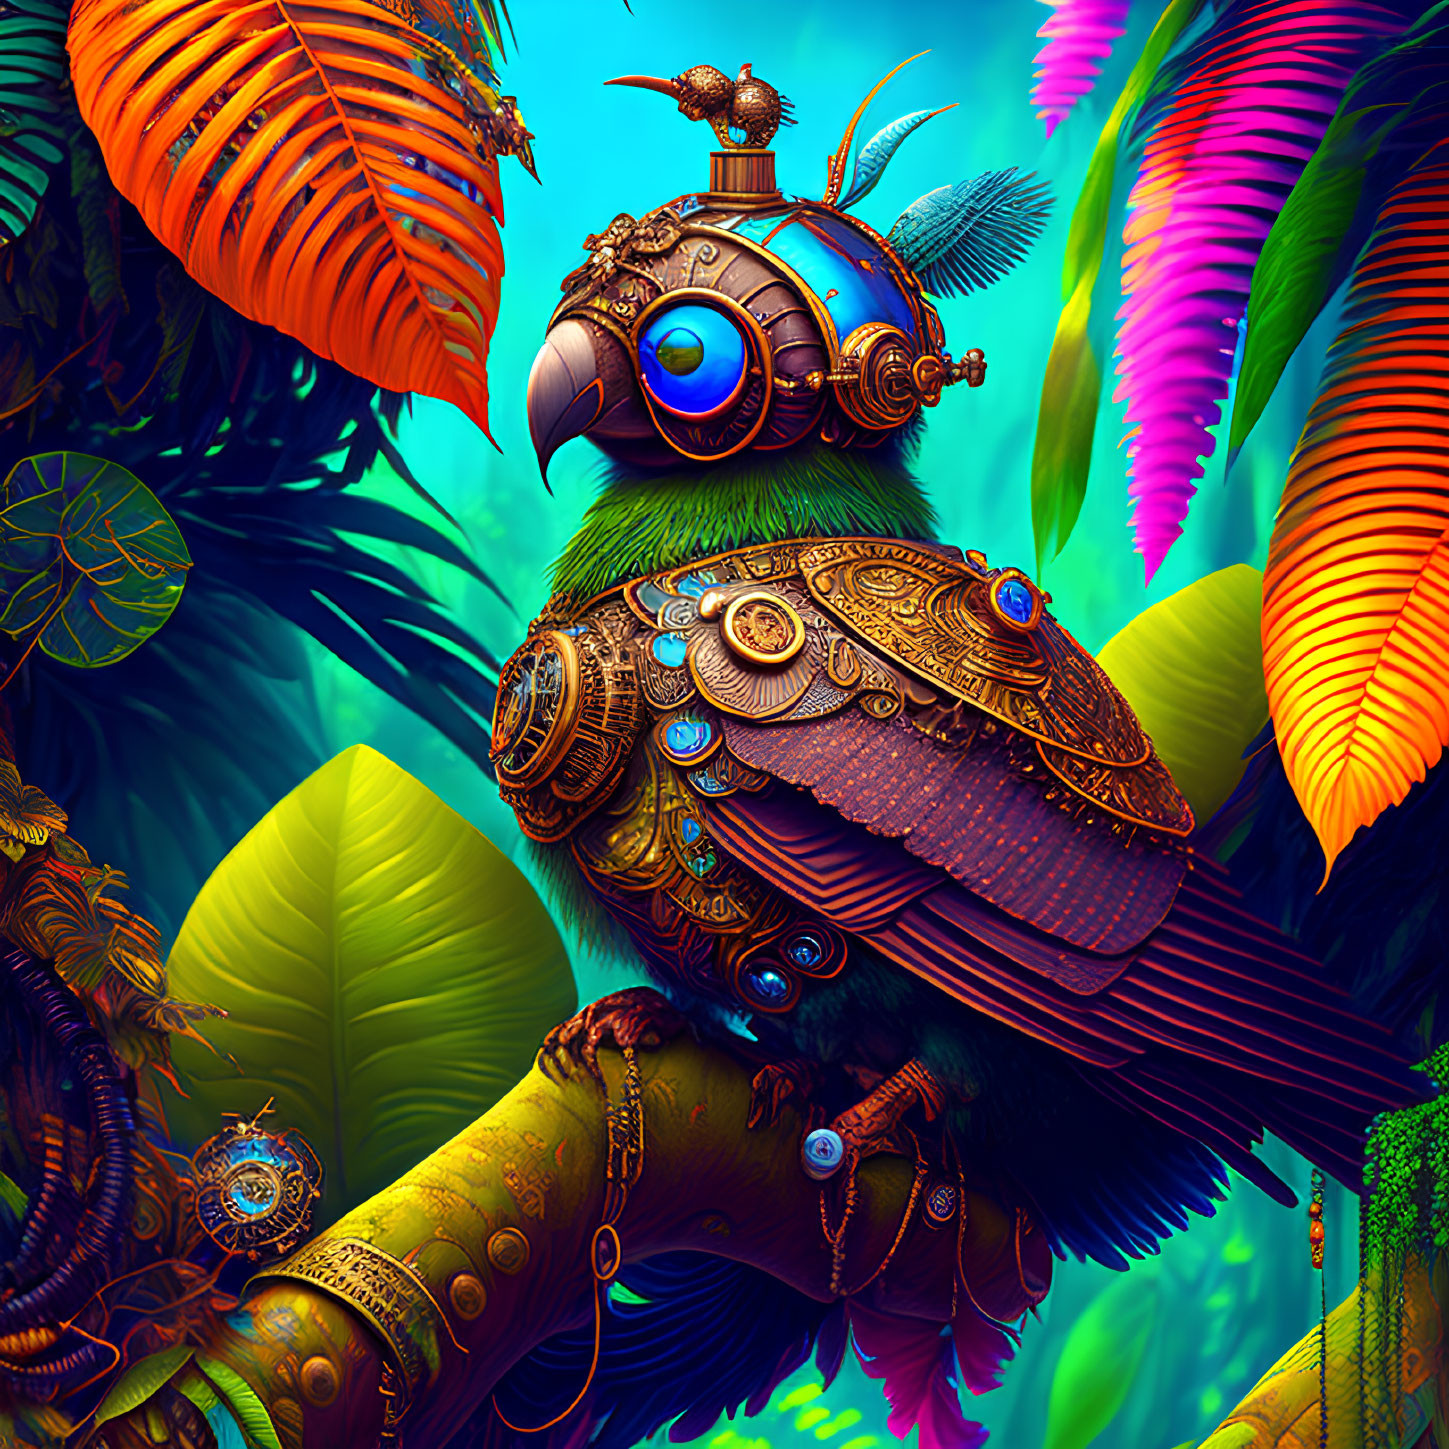 Colorful Steampunk Mechanical Parrot in Tropical Setting